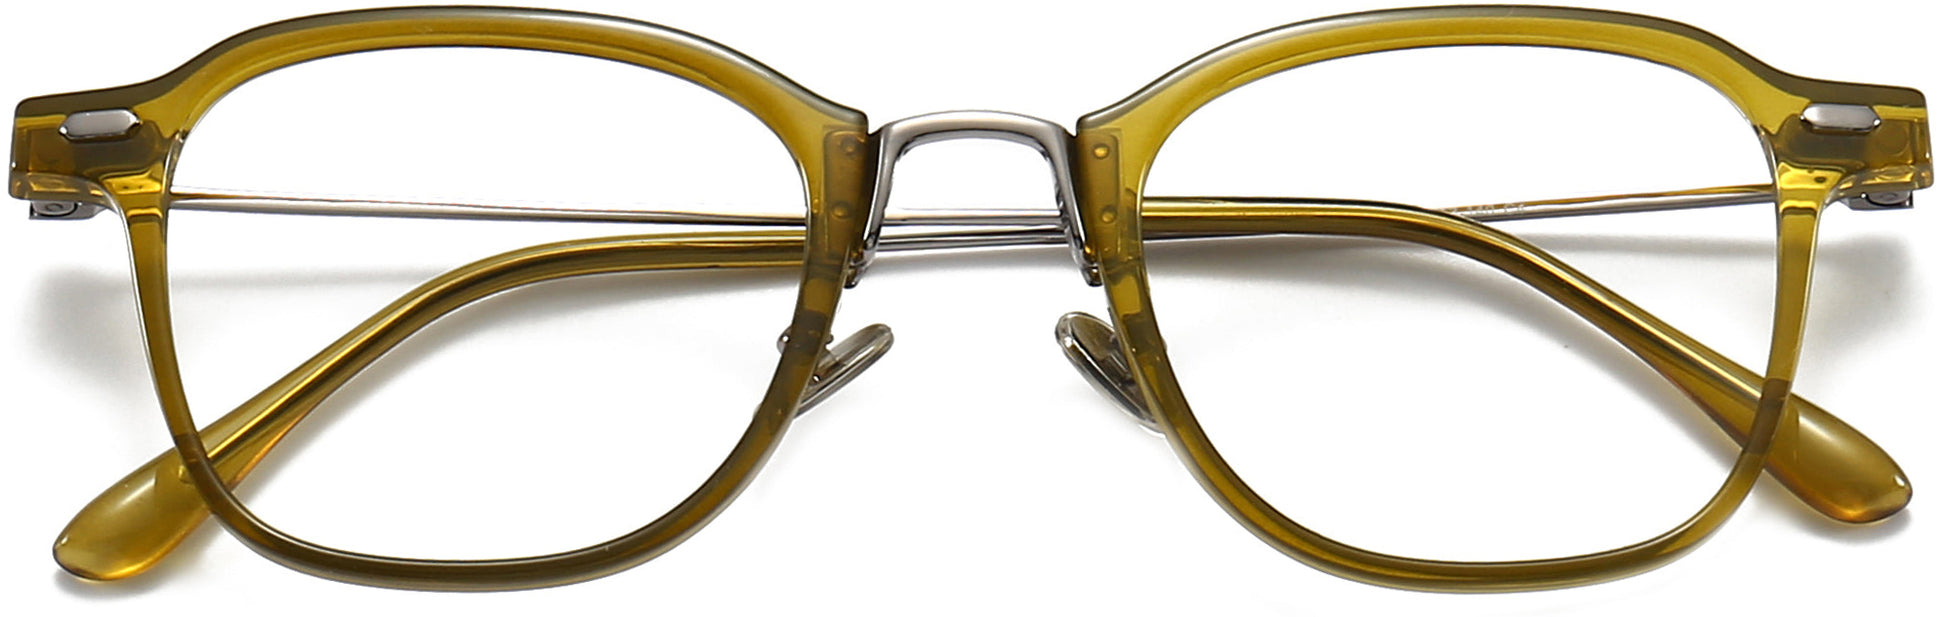 Frankie Square Green Eyeglasses from ANRRI, closed view